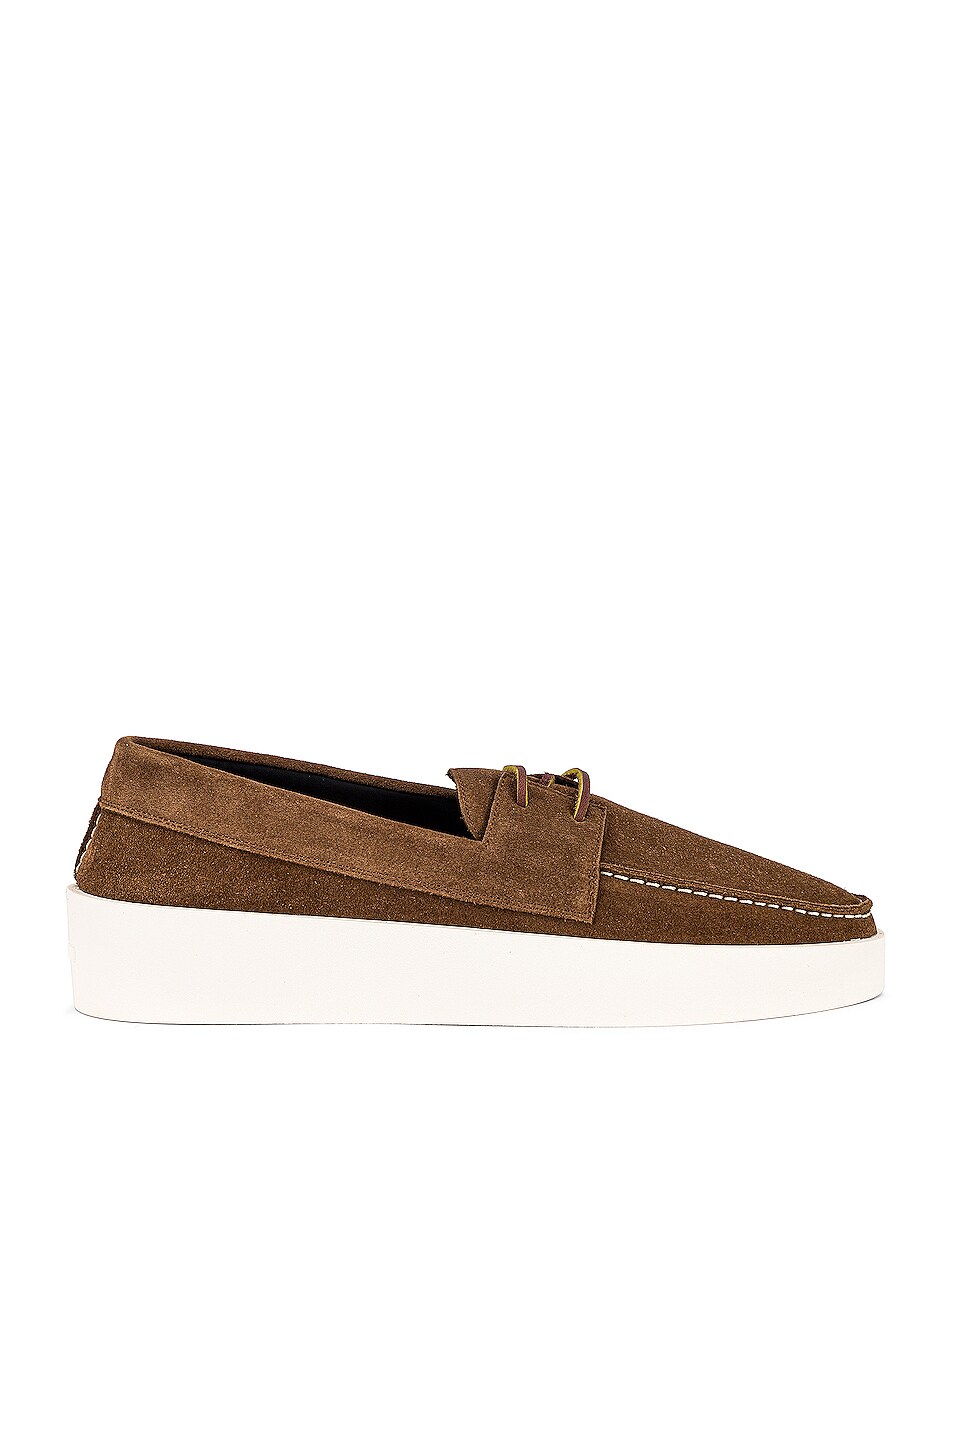 Image 1 of Fear of God Boat Sneaker in Sigaro